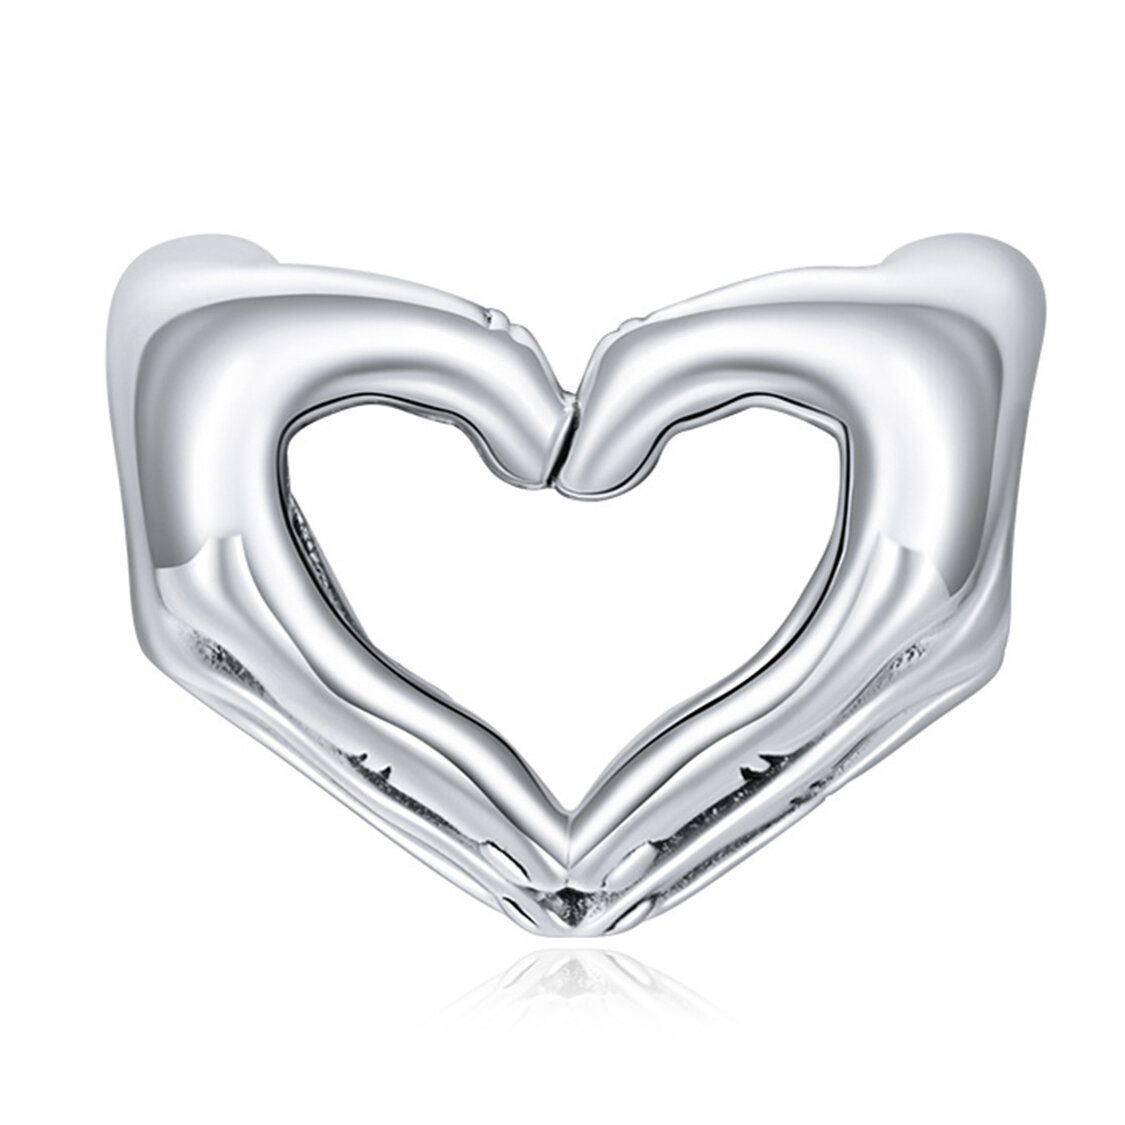 GemKing BSC498 Show love S925 Sterling Silver Charm